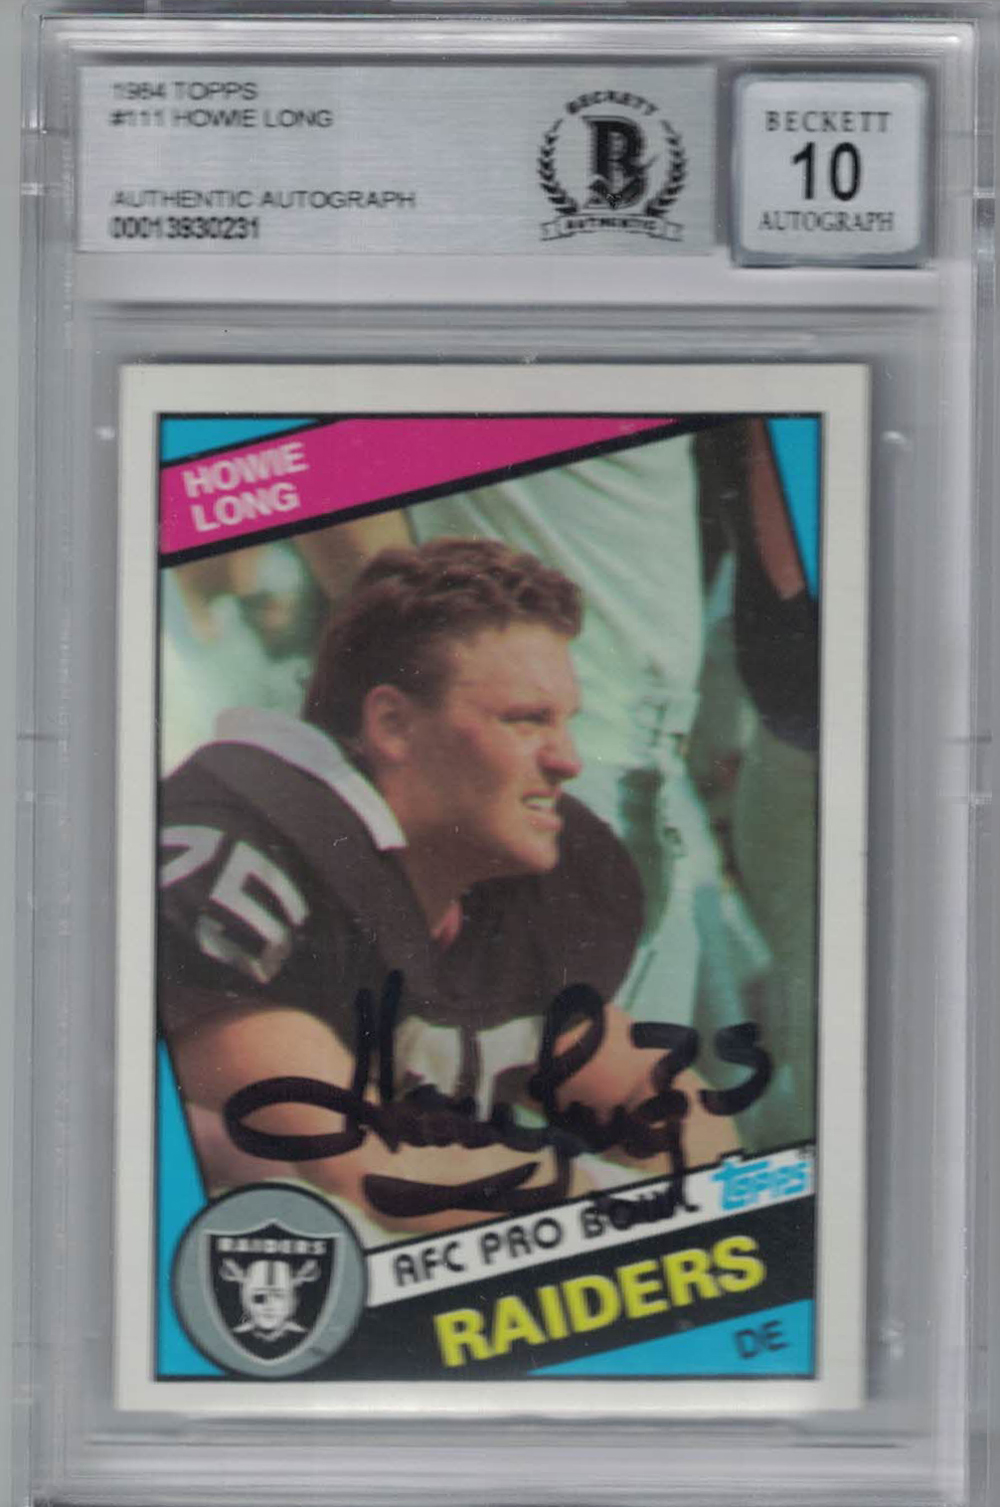 Howie Long Autographed 1984 Topps #111 Rookie Card Beckett 10 Slabbed